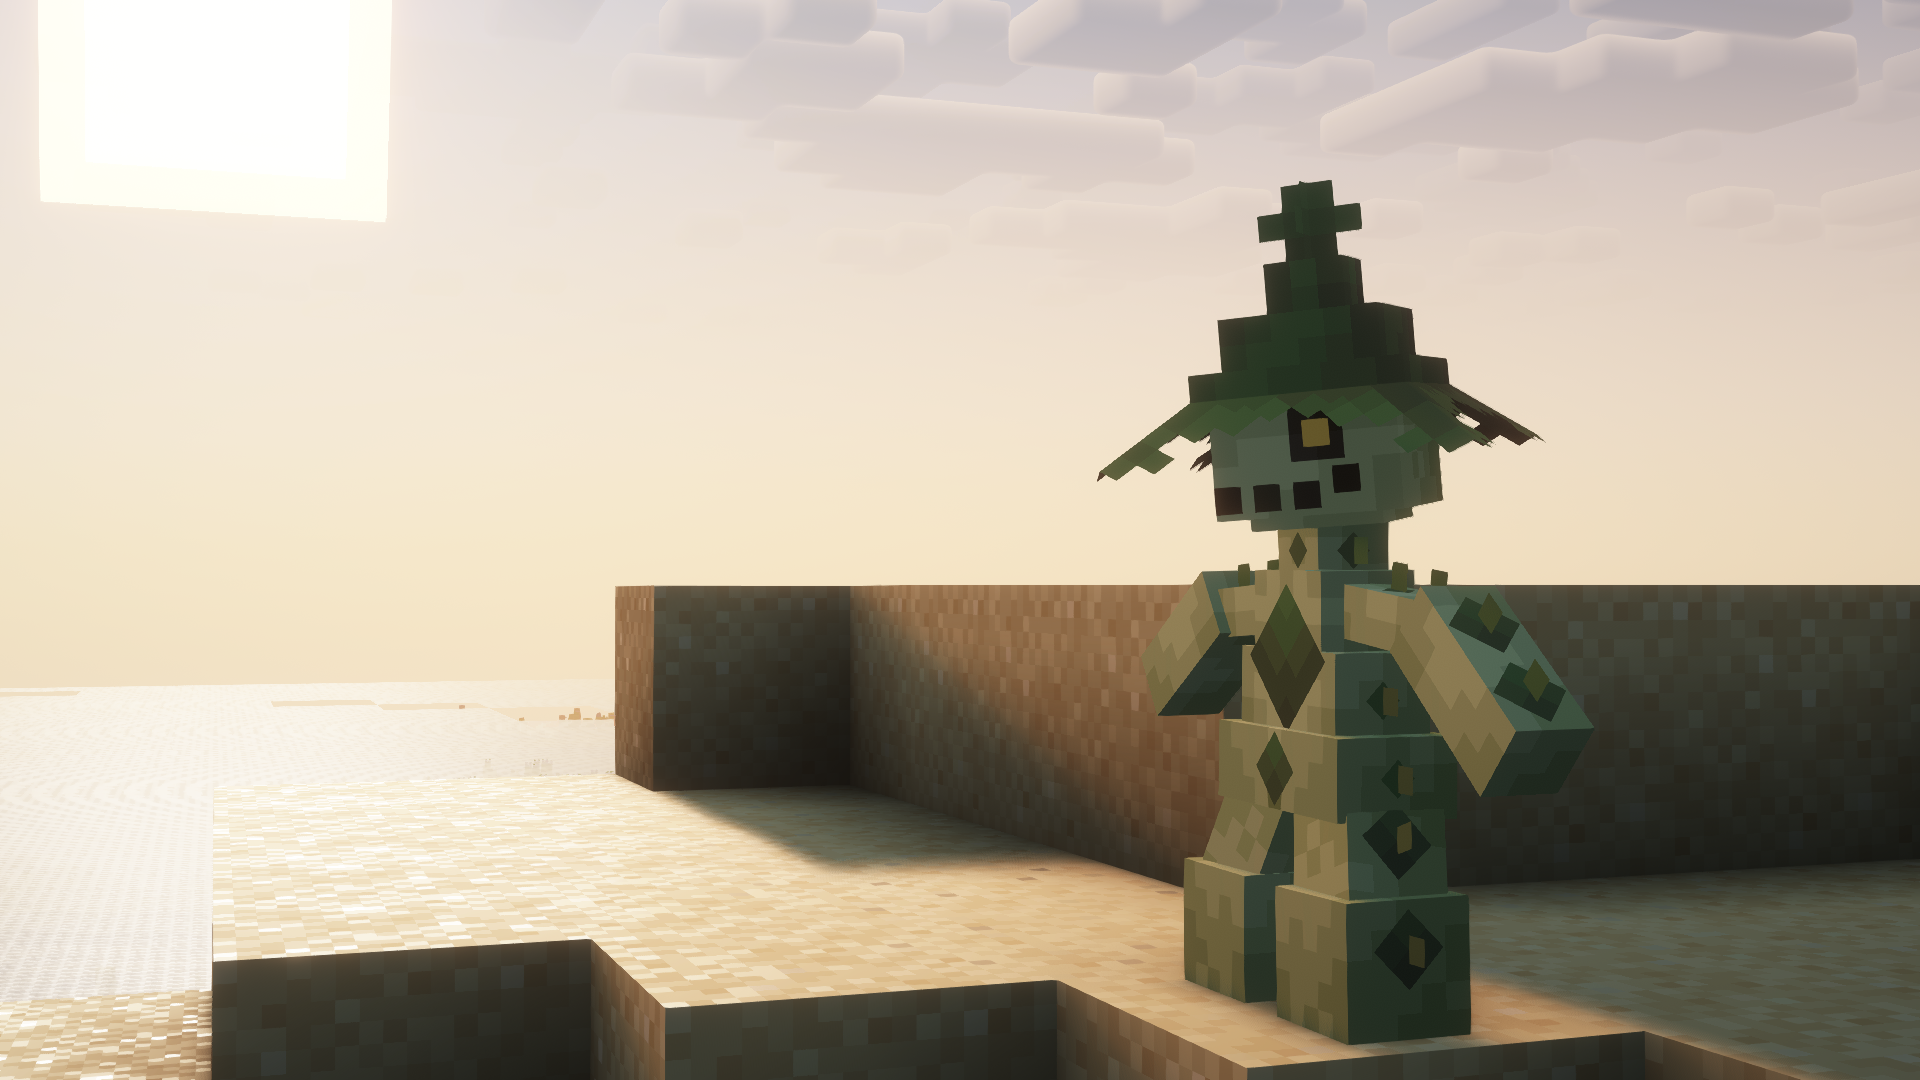 Finding Spiritomb in Minecraft… in an Ancient City (Cobblemon